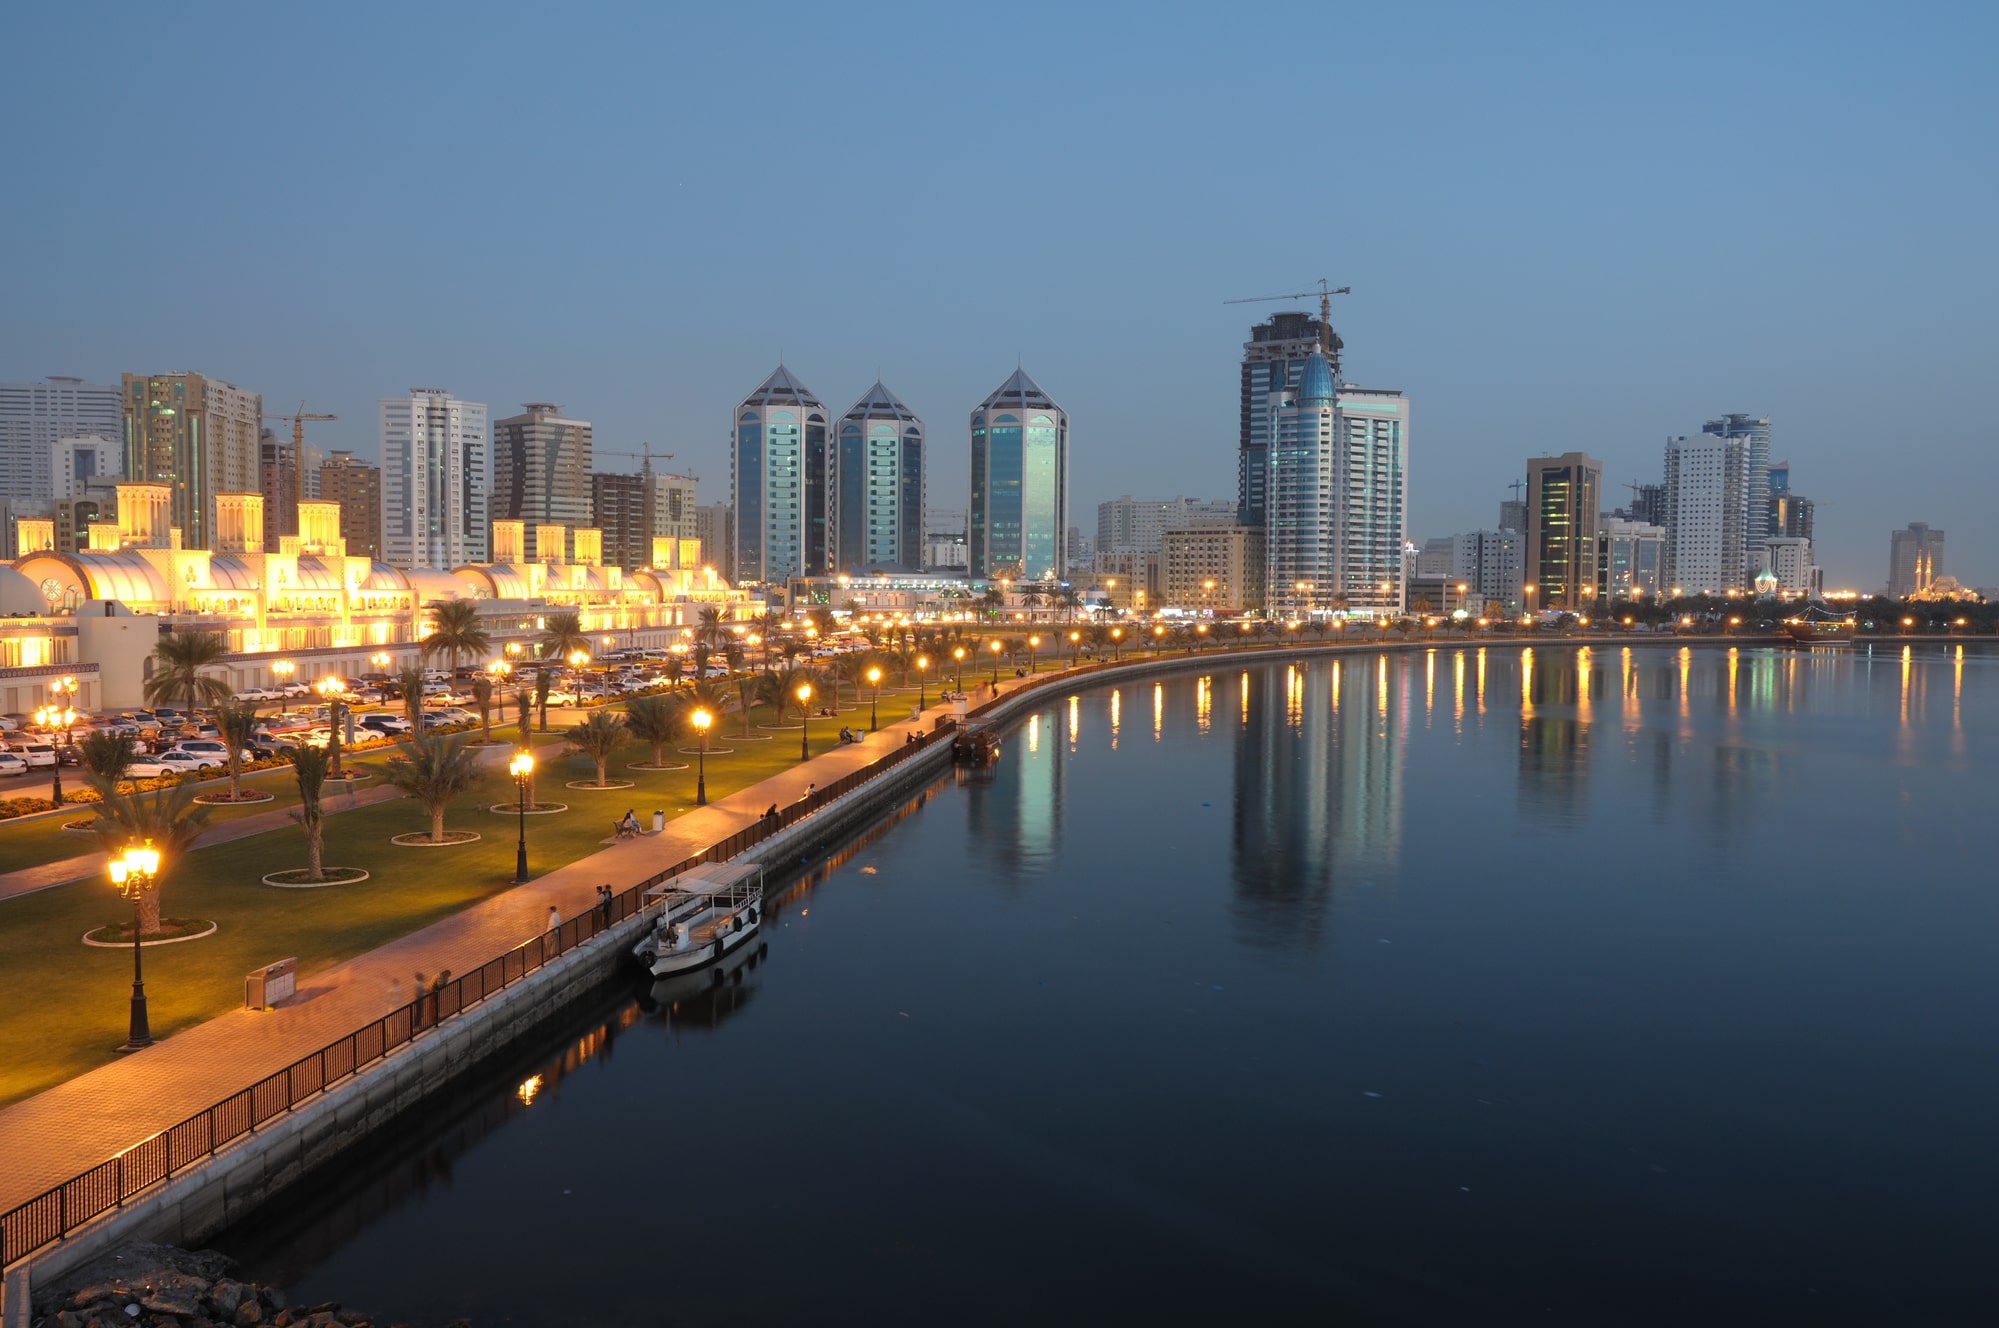 Sharjah Innovation Park approves DLT licenses to operate blockchain and fintech startups